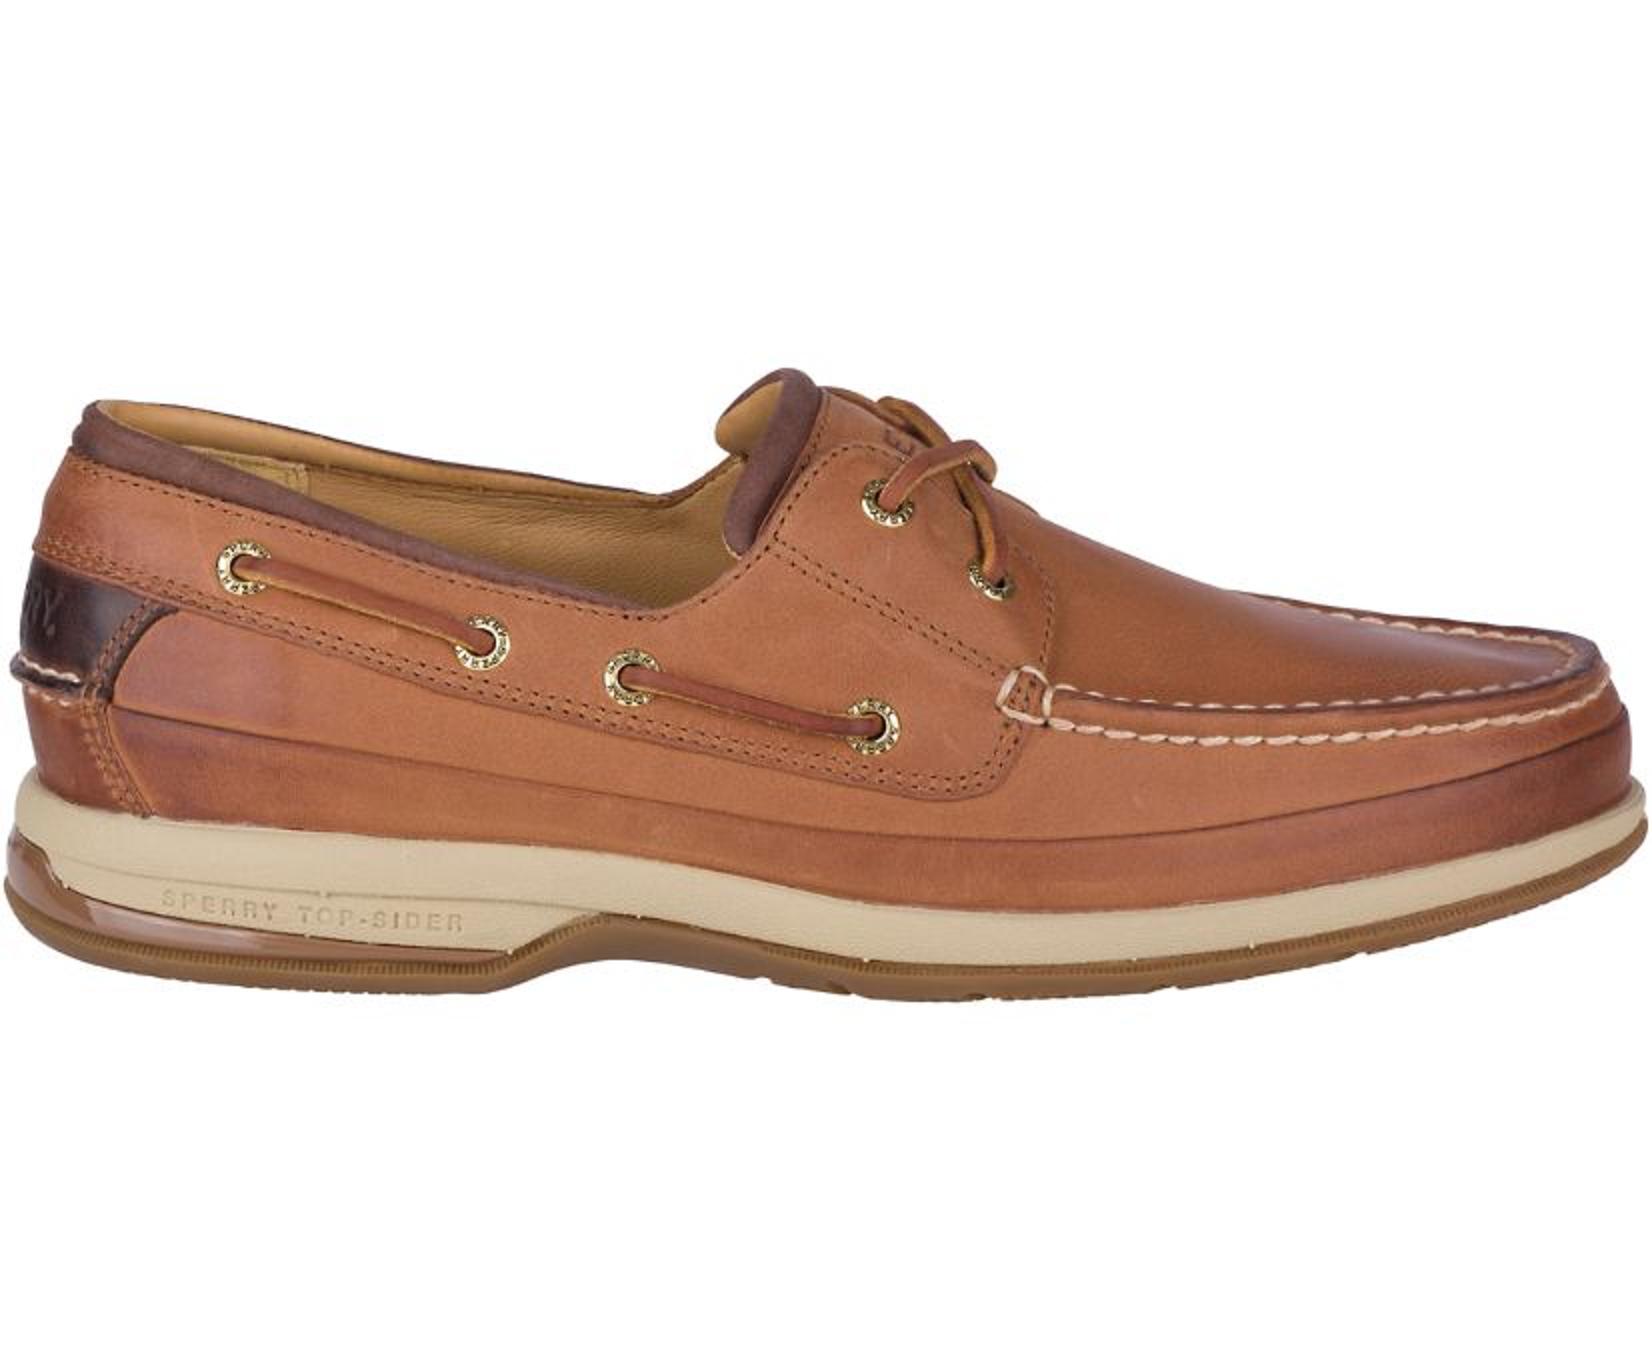 Discount Sperry Gold Cup W/ASV Boat Shoe Cymbal - Sperry Mens Shoes 2021